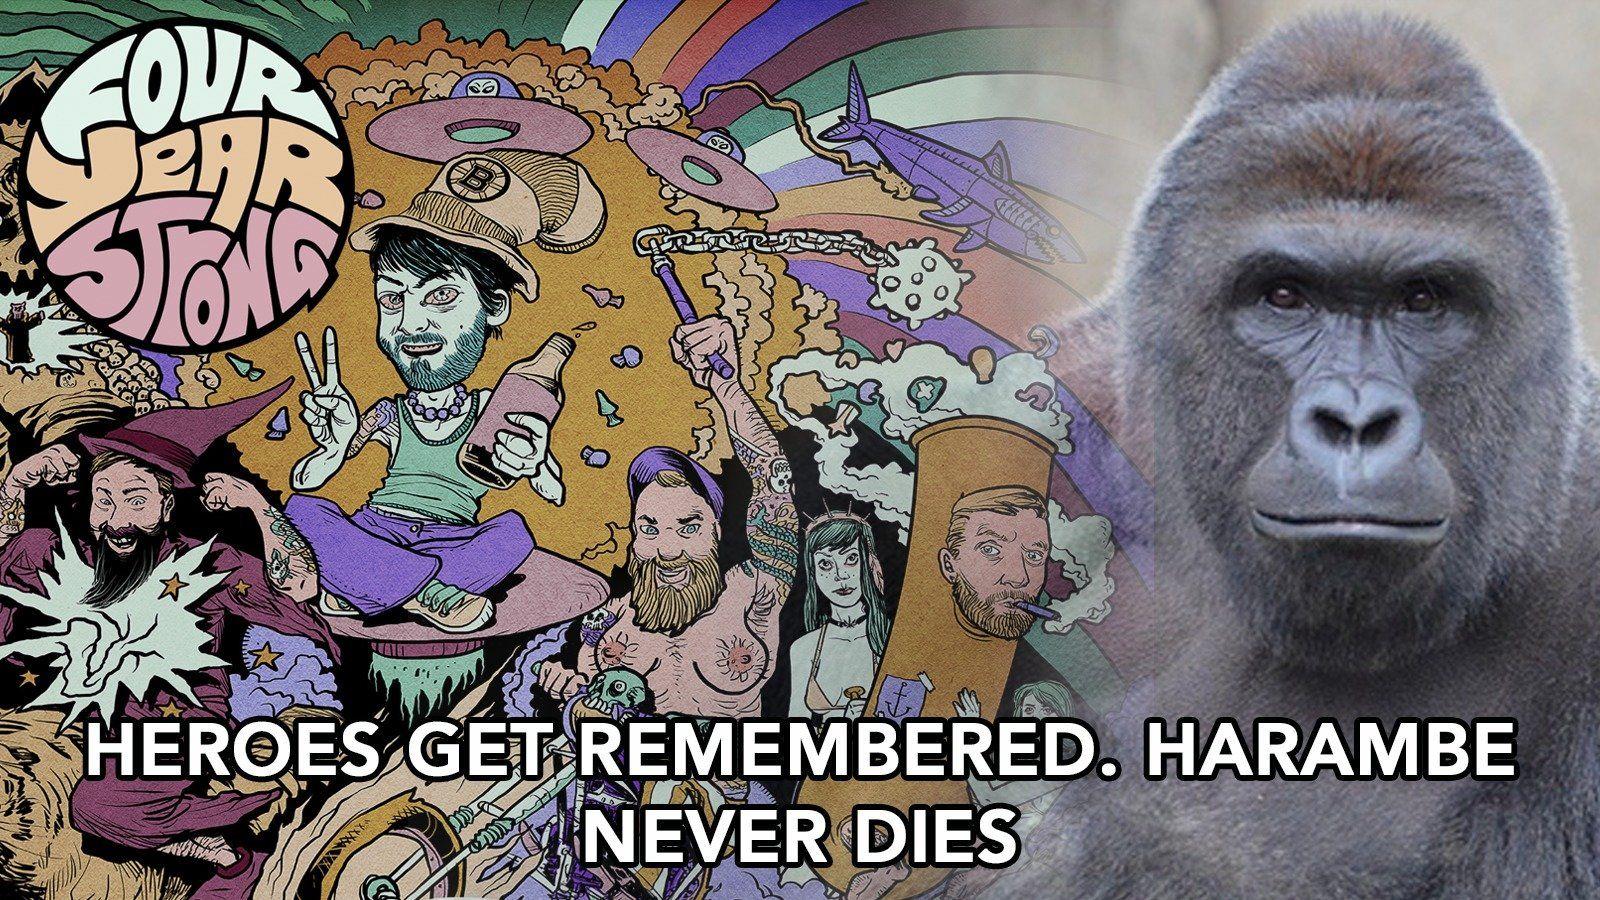 Petition · Four Year Strong: Put Harambe on Four Year Strong's next